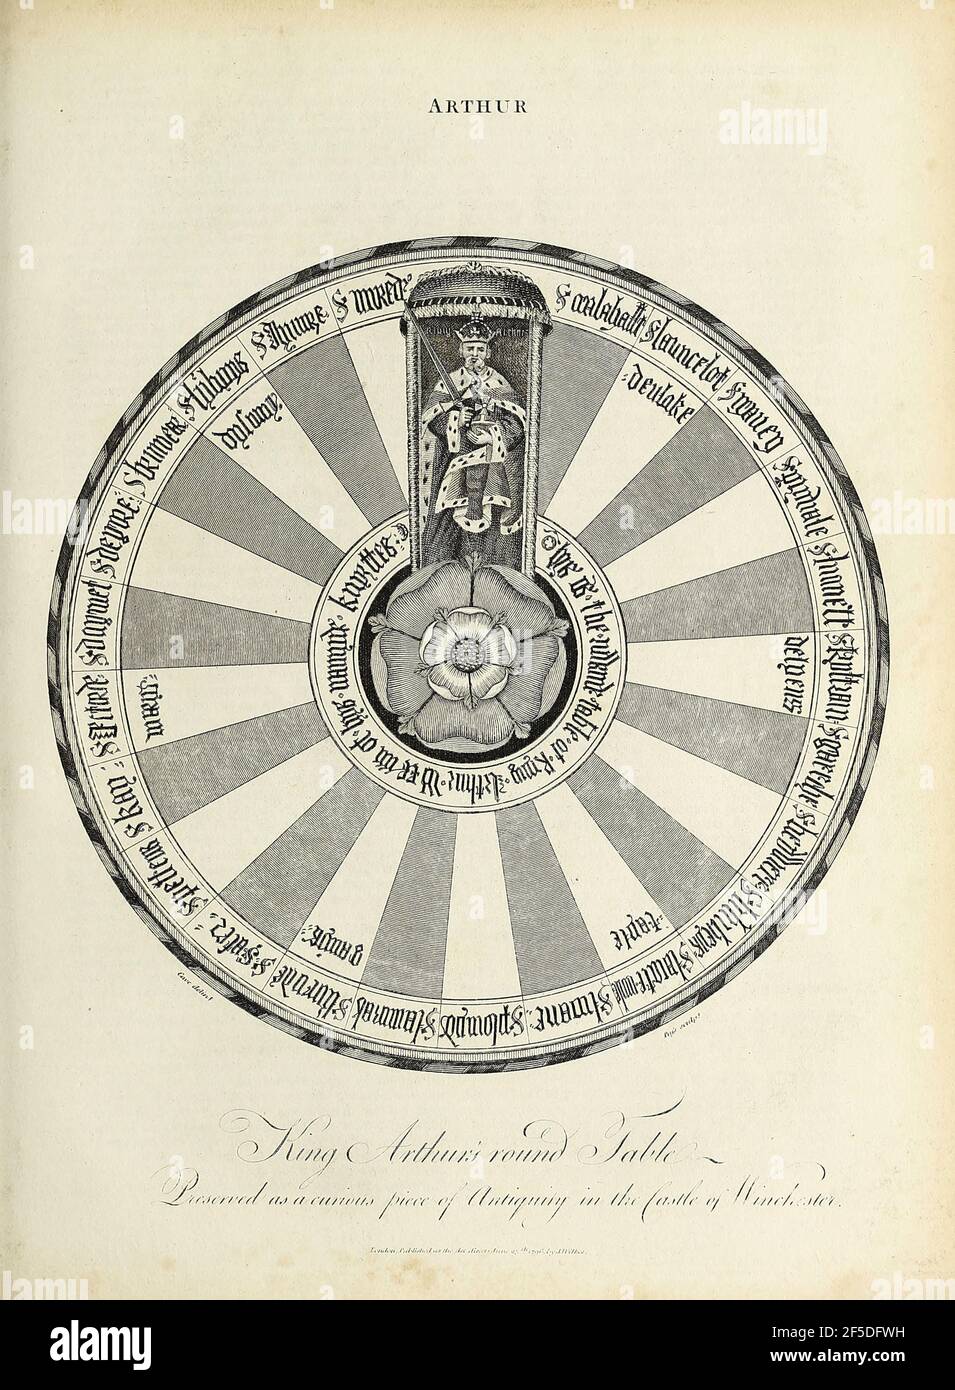 King Arthur's Round Table Copperplate engraving From the Encyclopaedia Londinensis or, Universal dictionary of arts, sciences, and literature; Volume II;  Edited by Wilkes, John. Published in London in 1810 Stock Photo